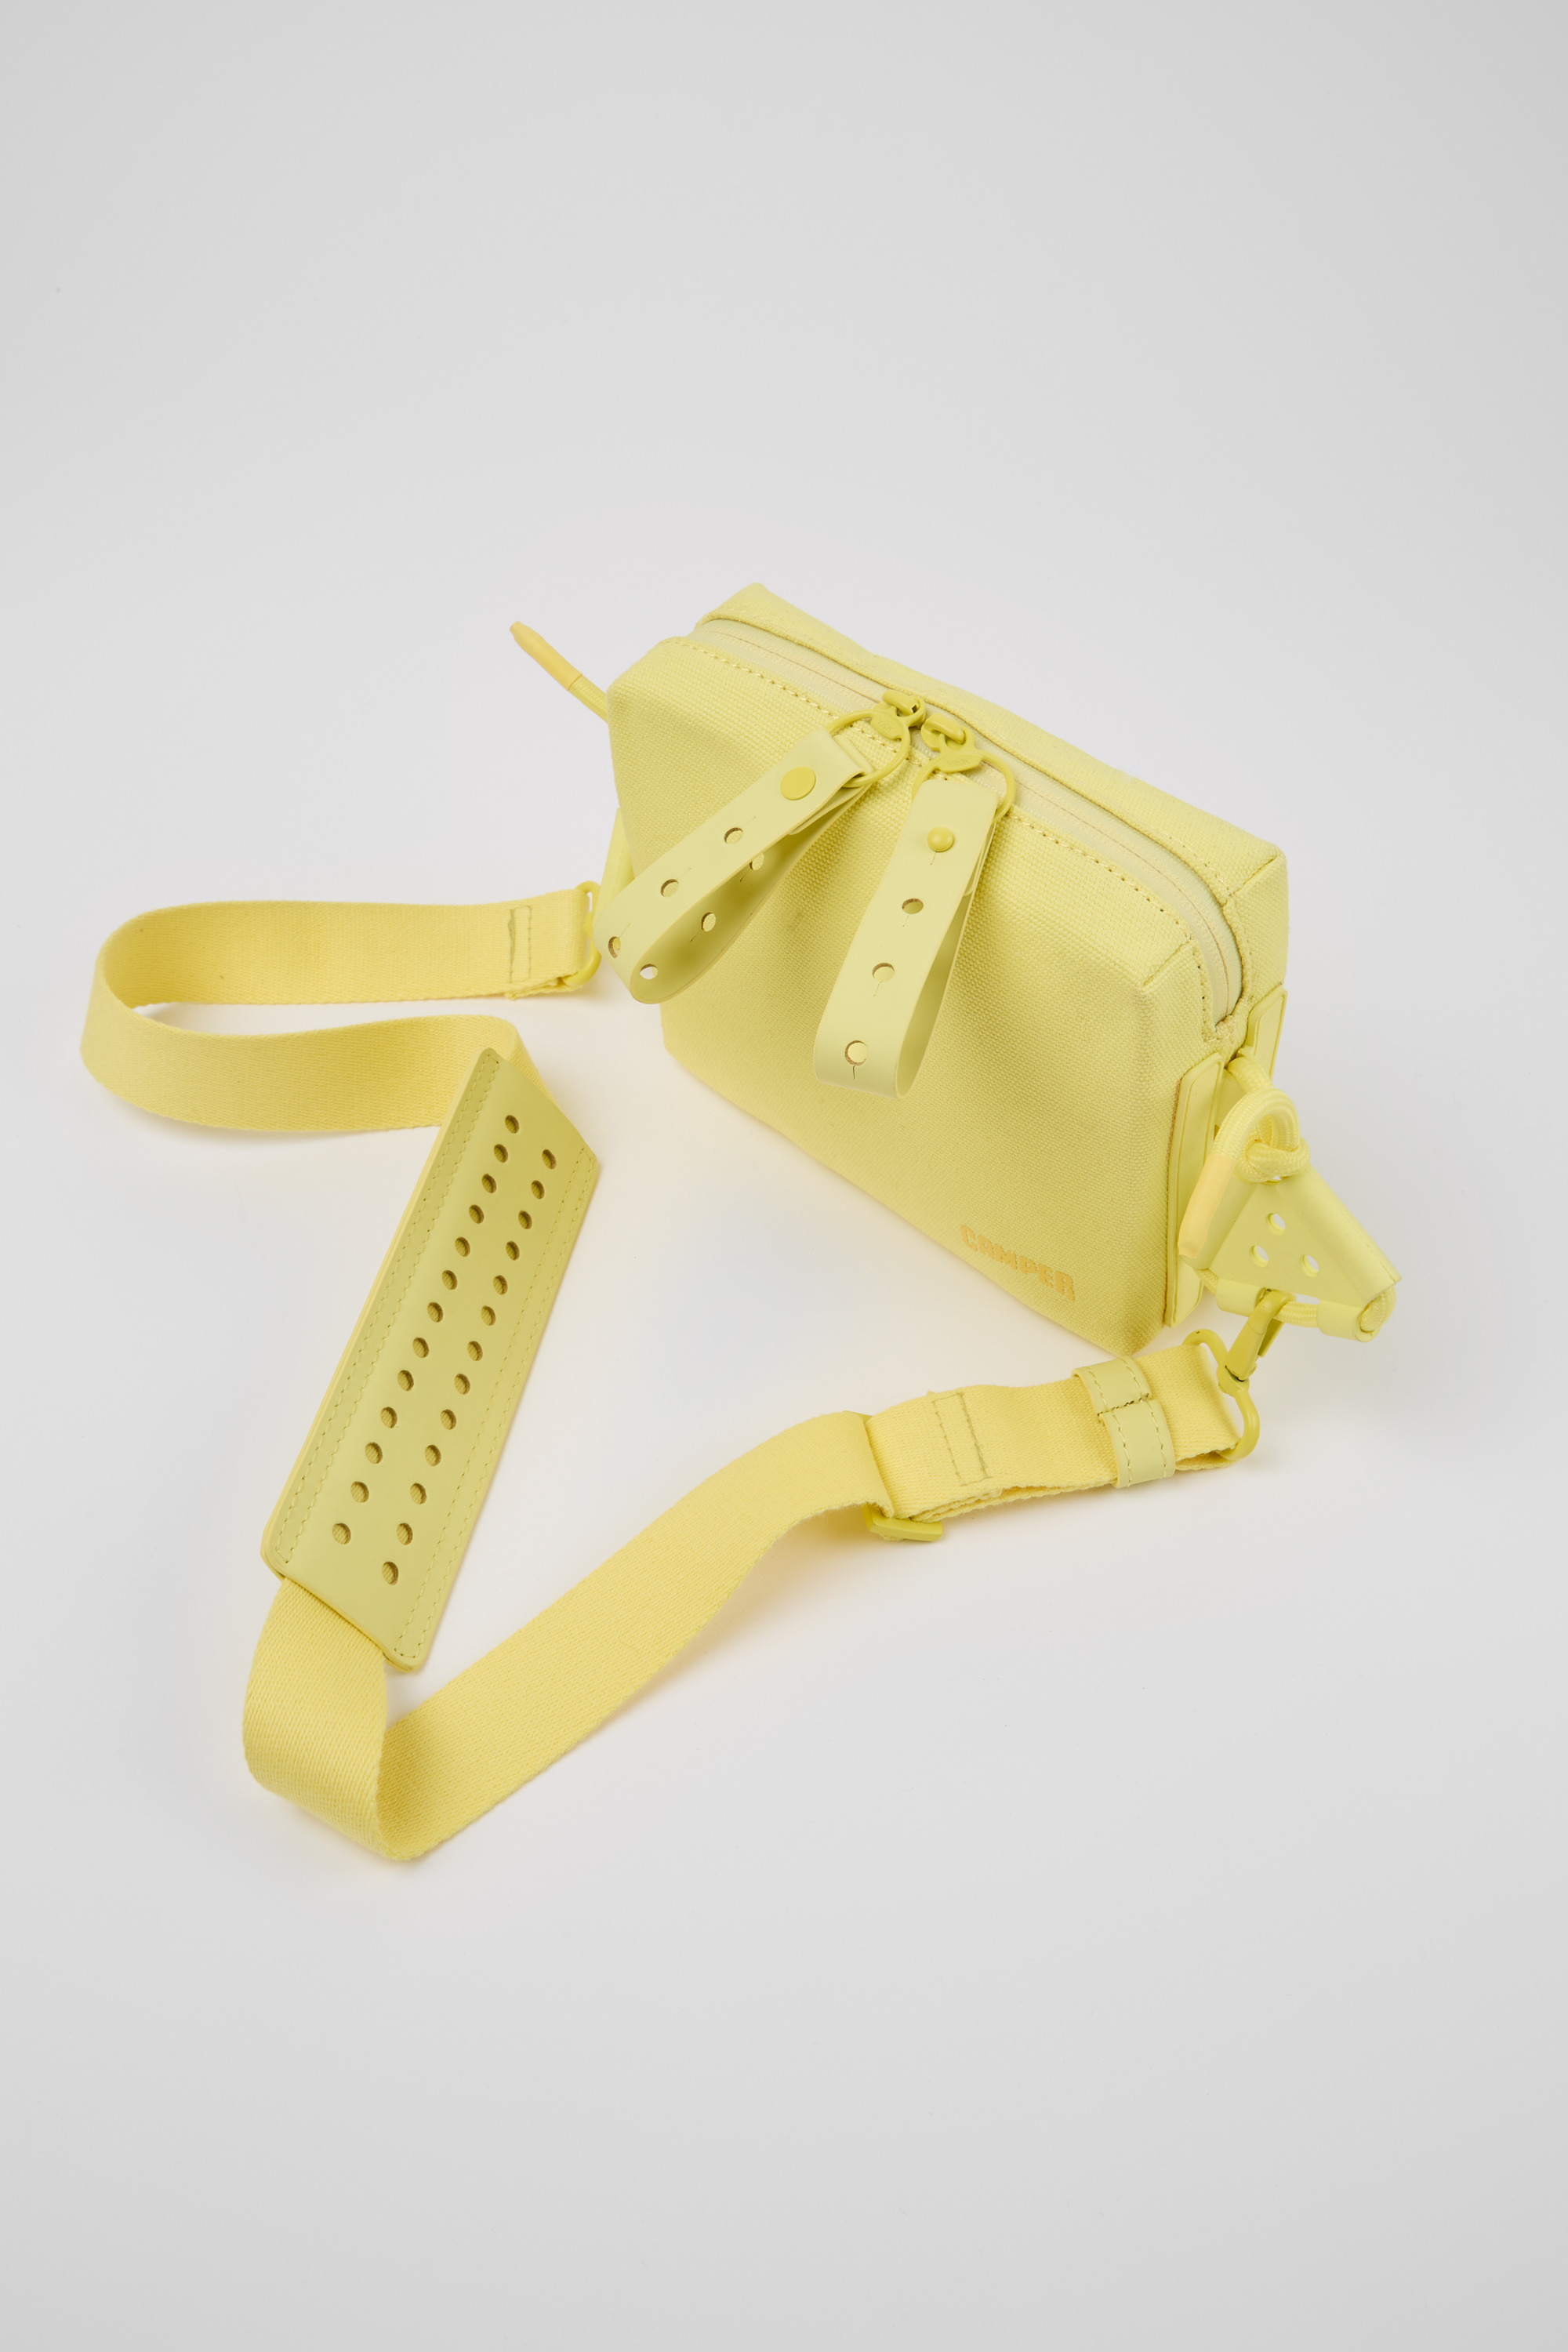 Yellow Bags & Accessories for Unisex - Fall/Winter collection - Camper  Canada